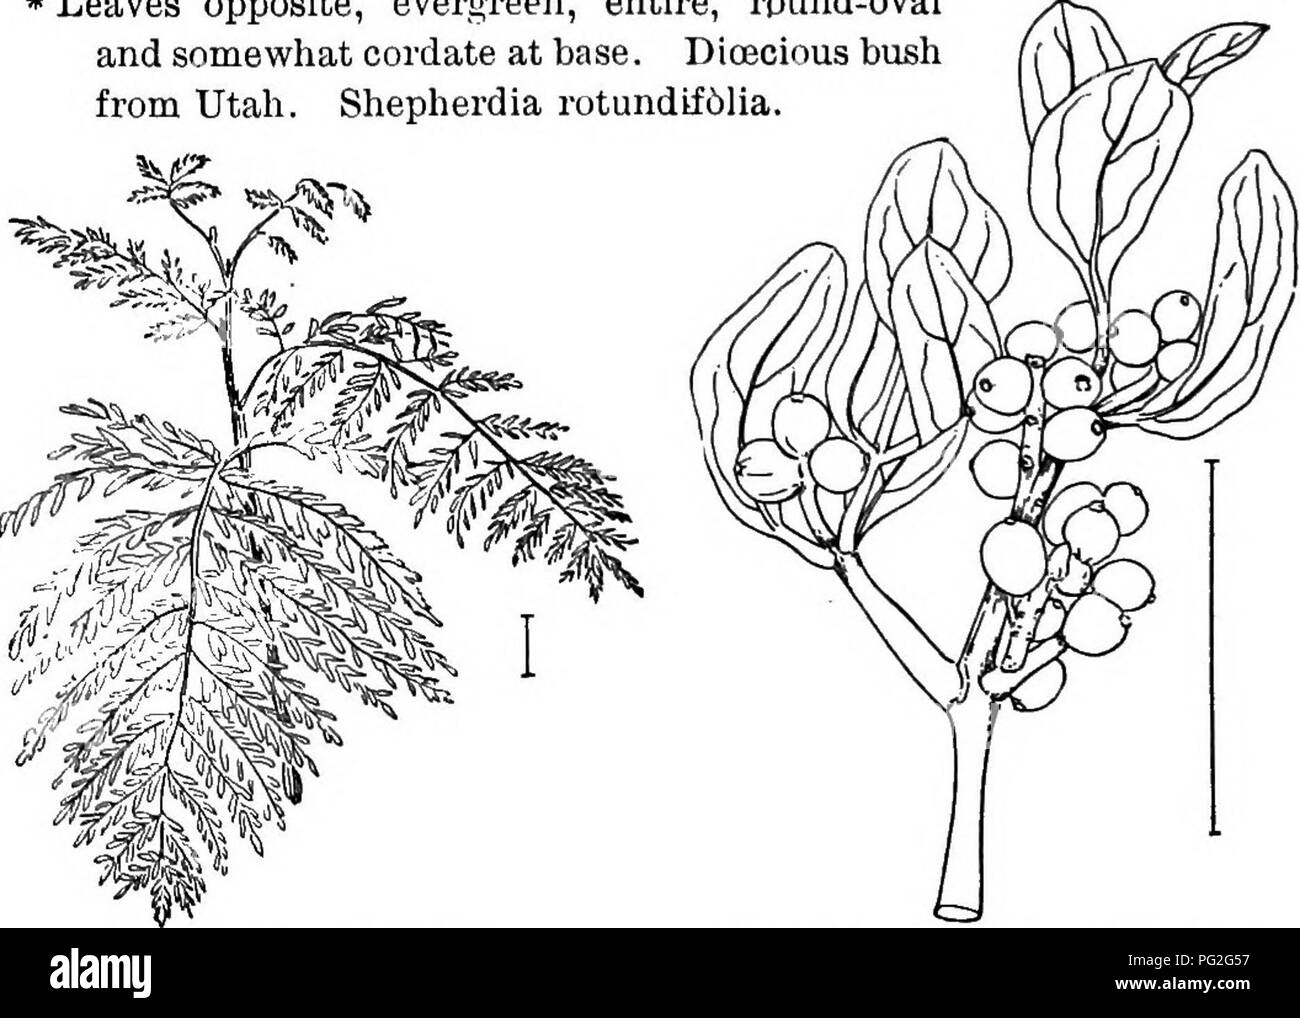 . Ornamental shrubs of the United States (hardy, cultivated). Shrubs. KEY TO THE SILVERY-SCALED SHRUBS, ETC. 305 * Leaves alternate, evergreen; usually flowering in the fall; hardy only South, small shrubs to 6 feet. (B.) E. no spines; leaves broad, silvery he- EvEEGKEEN El^agnus — Elsagnus B. Branchlets silvery-white neath. Lakge-leaved macrophylla. Branchlets brown; usually very spiny; leaves oval, undulate, 2-4 inches long, silvery beneath with some brownish scales; fruit short-stalked, | inch long, covered with silvery and brown scales; leaves often variegated with blotches and lines of wh Stock Photo